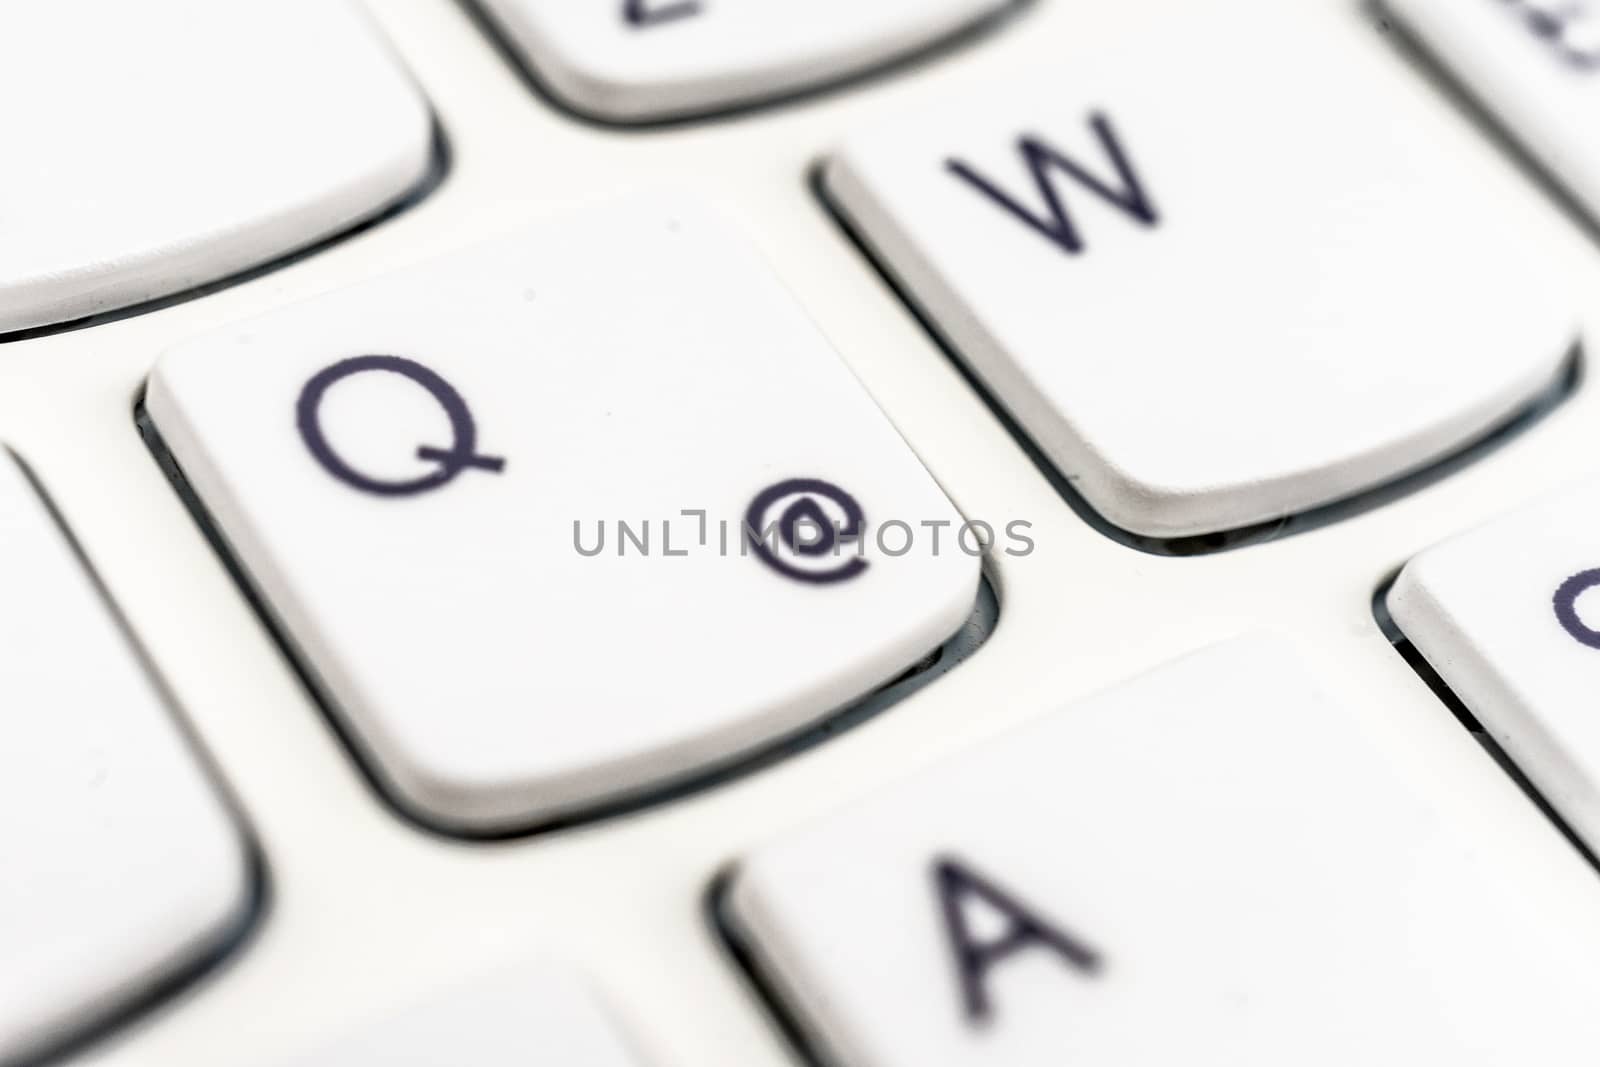 Detailed view of the Internet logo on a white keyboard